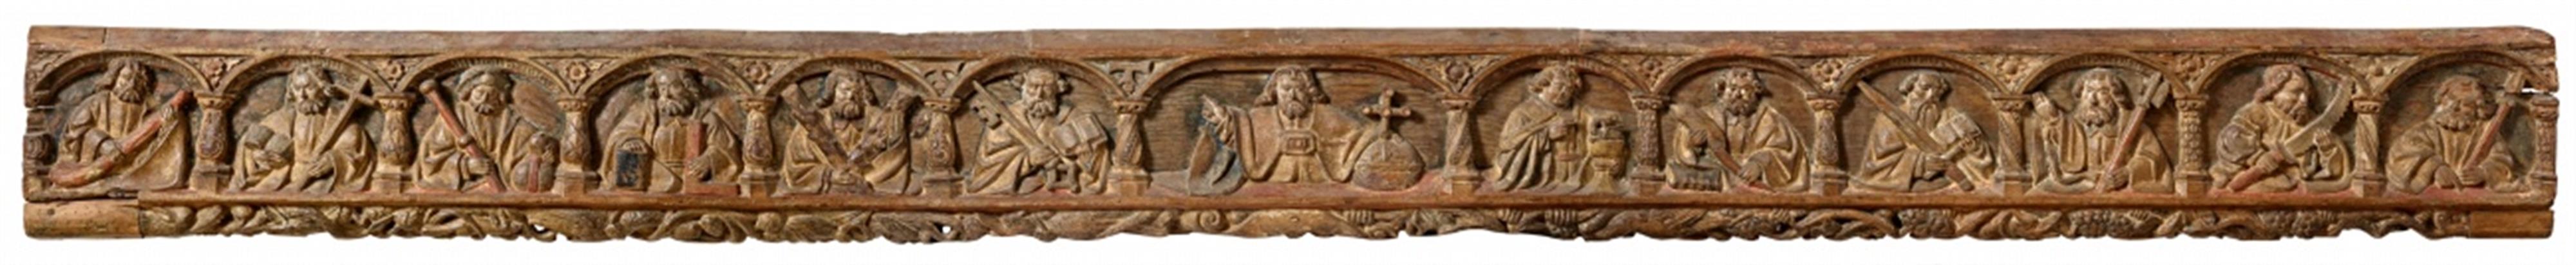 Probably Lower Rhine Region circa 1530 - A carved wooden relief of Christ and the Apostles (apostle beam), probably Lower Rhine-Region, circa 1530 - image-1